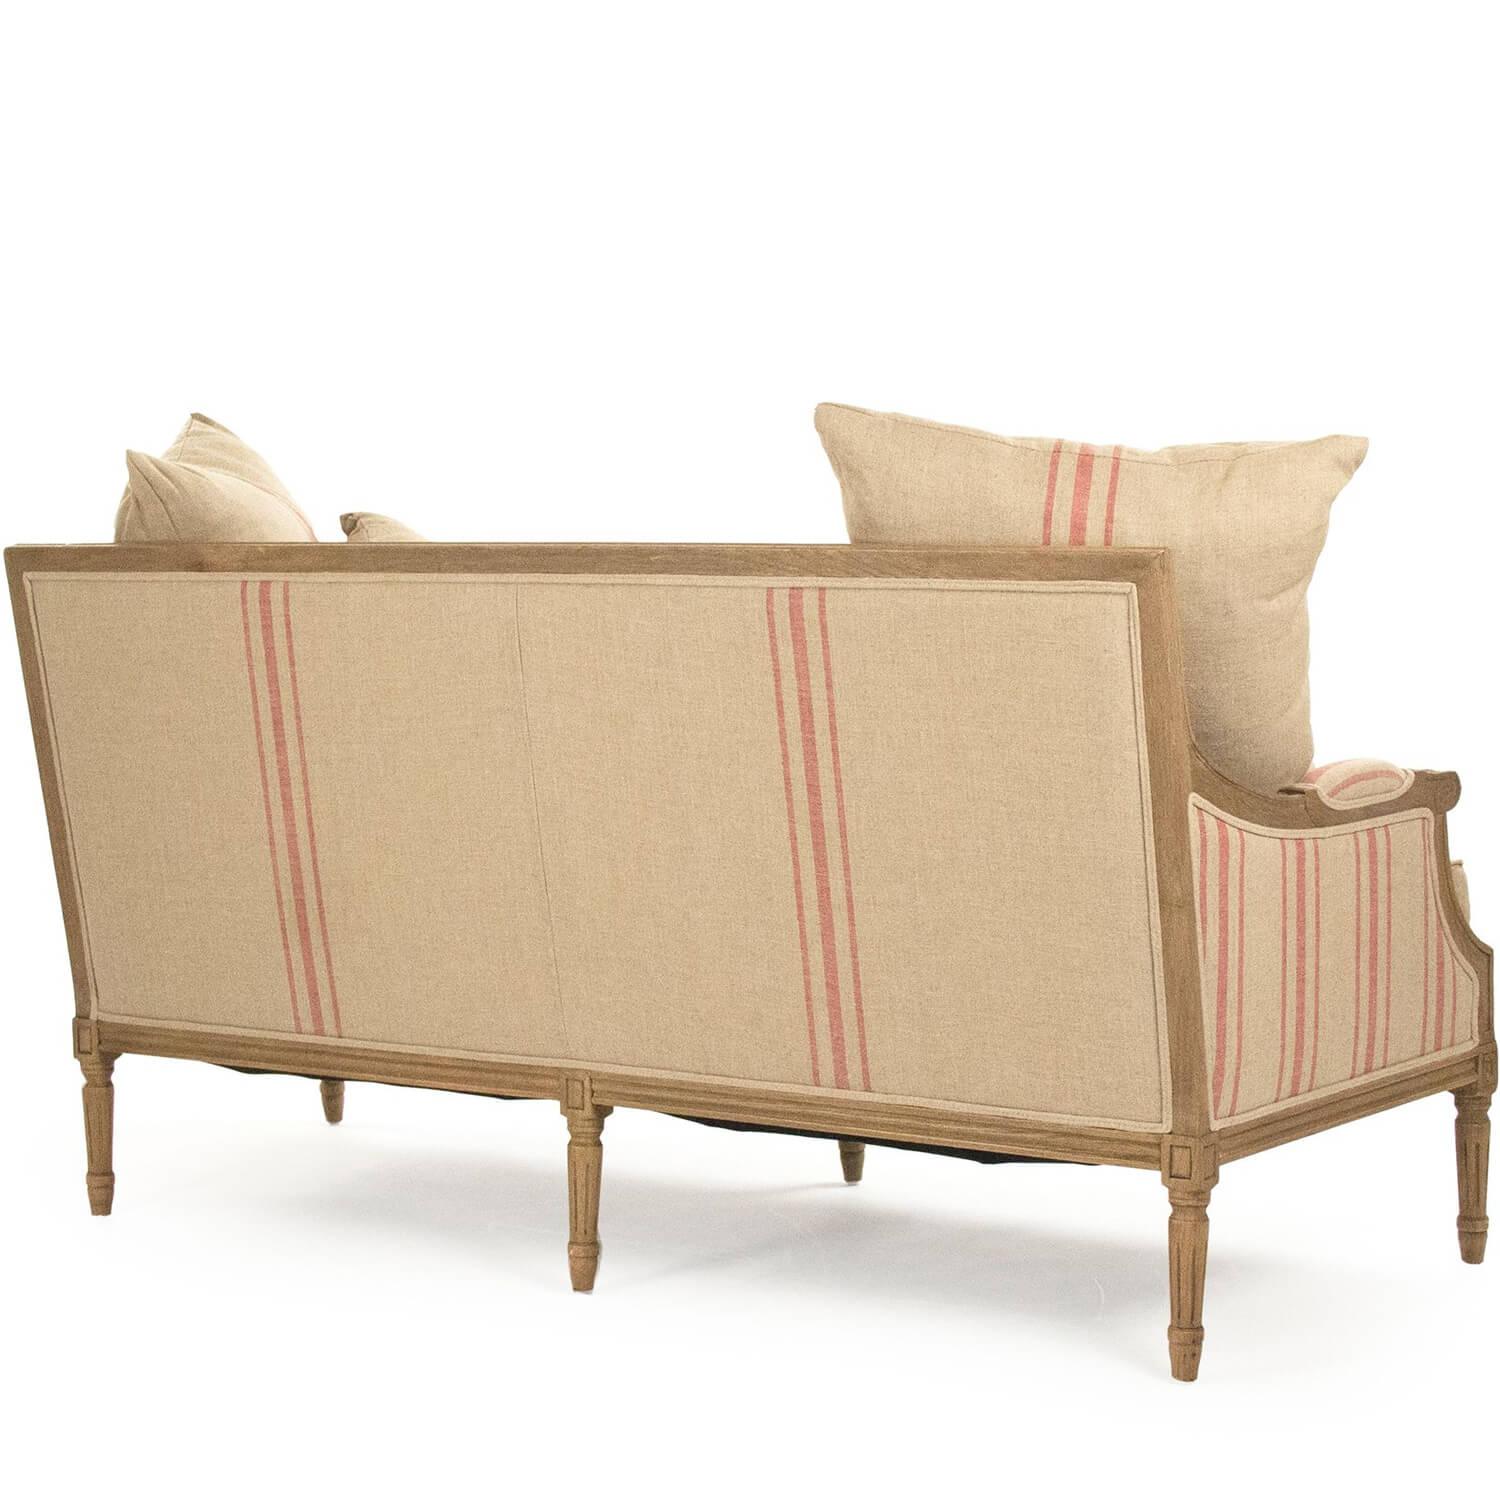 French Louis Red Striped Sofa - Belle Escape